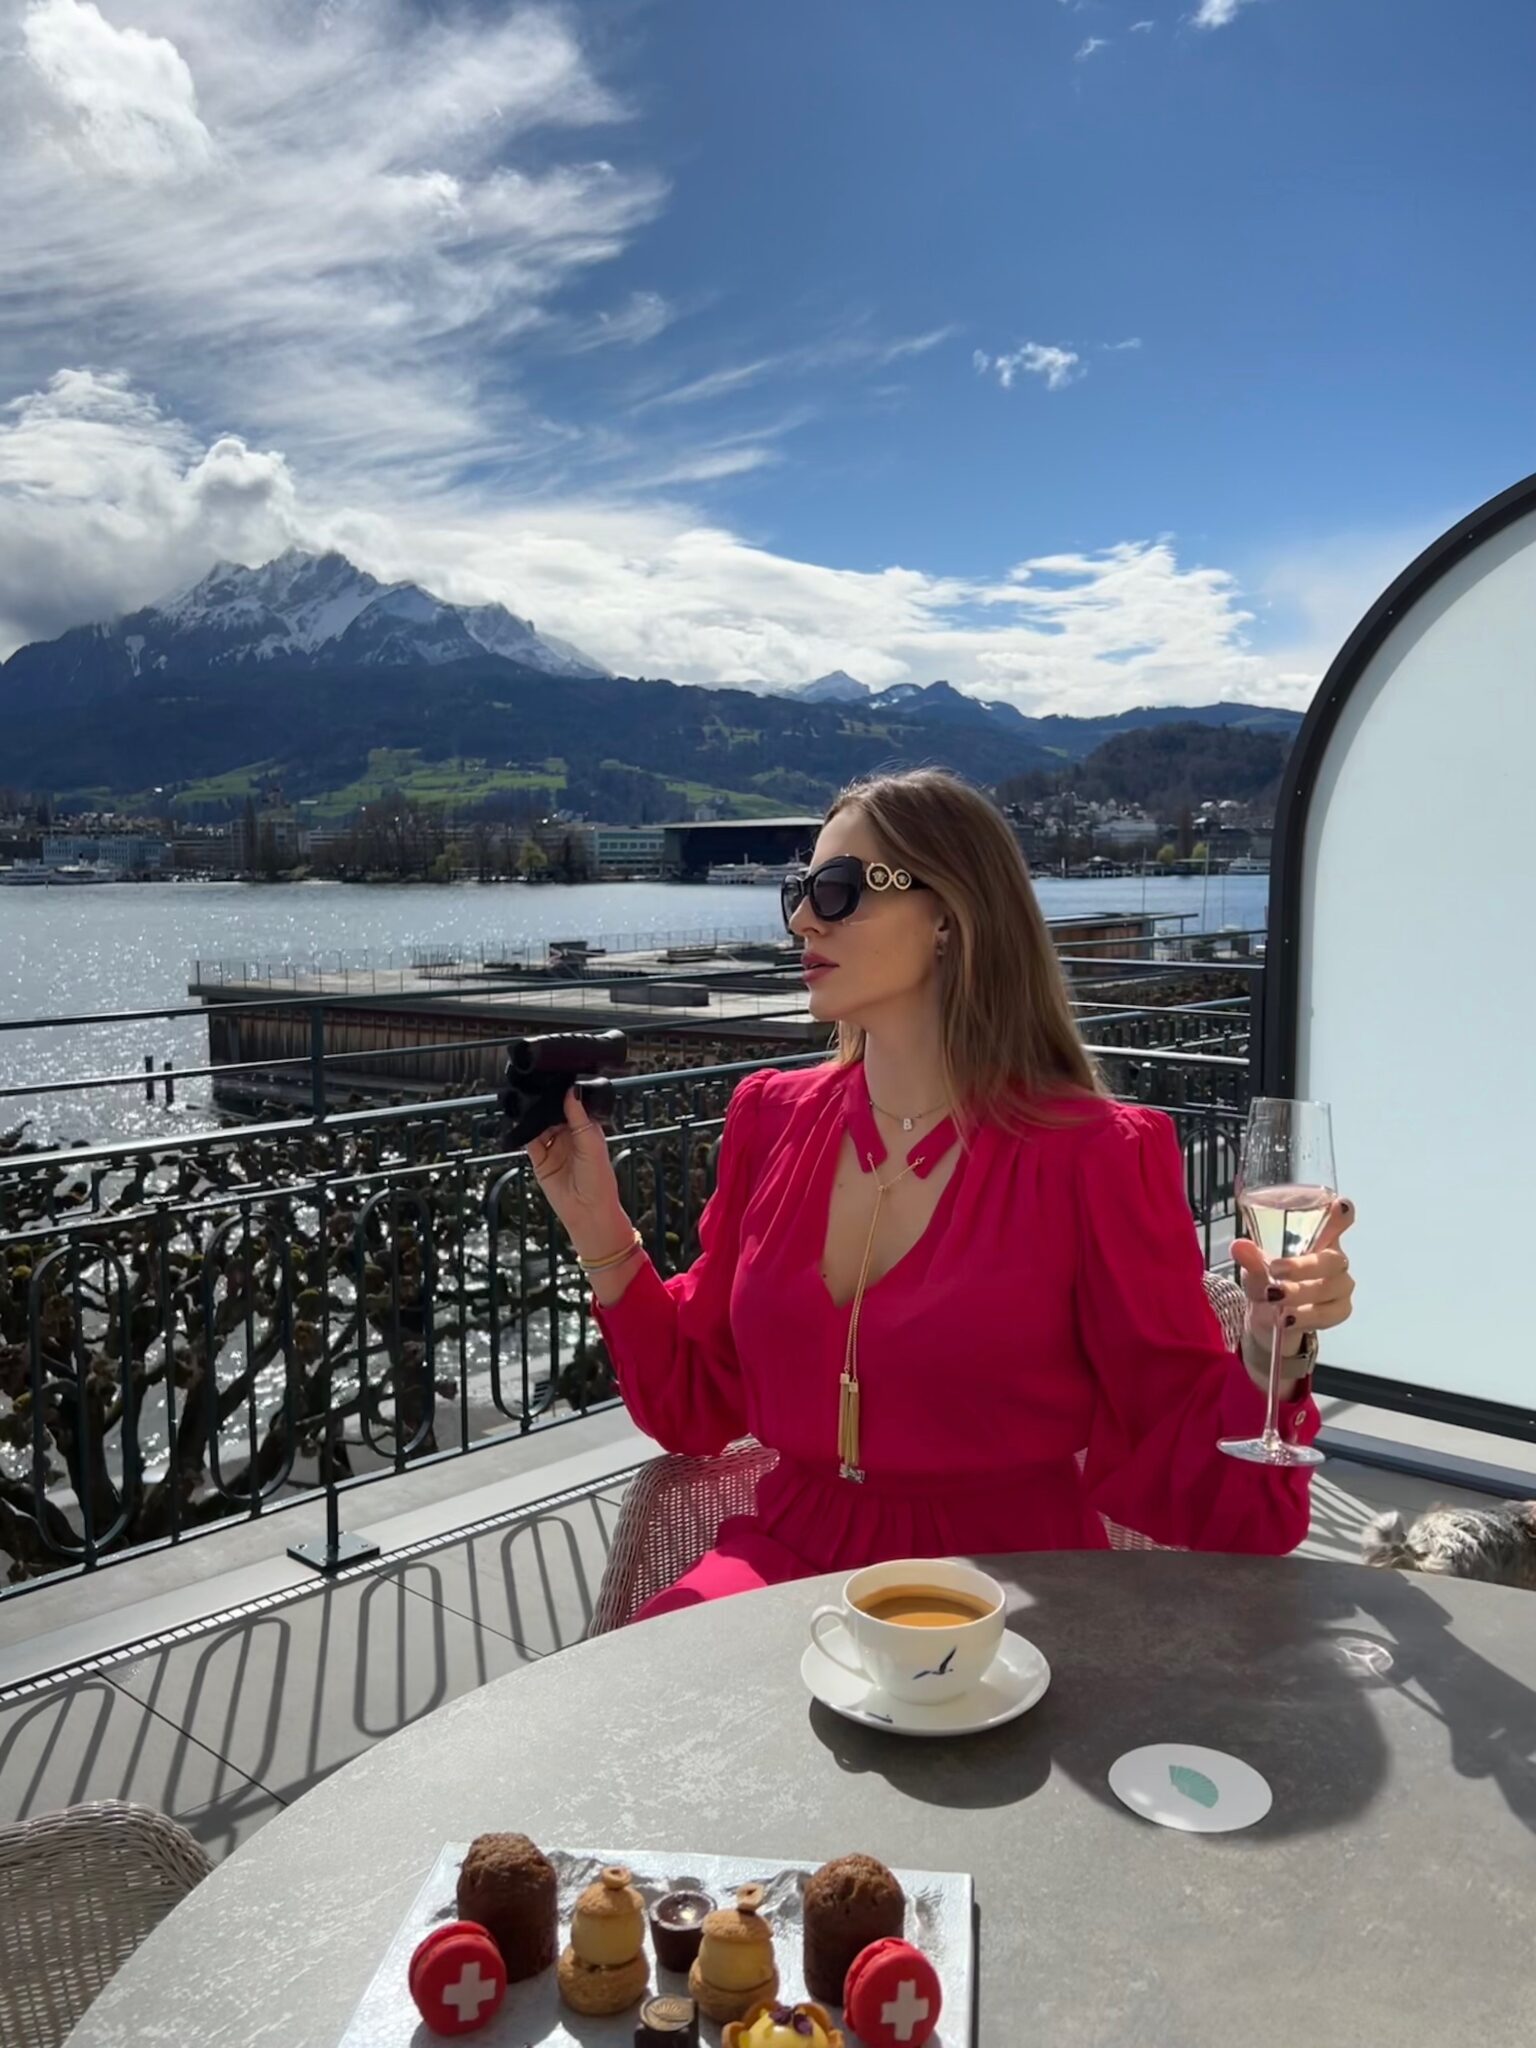 Mandarin Oriental Palace Luzern. A Historic Belle Epoque Palace reopened in 2022. /A magnificent hotel with a panoramic view of Lake Lucerne./ 25